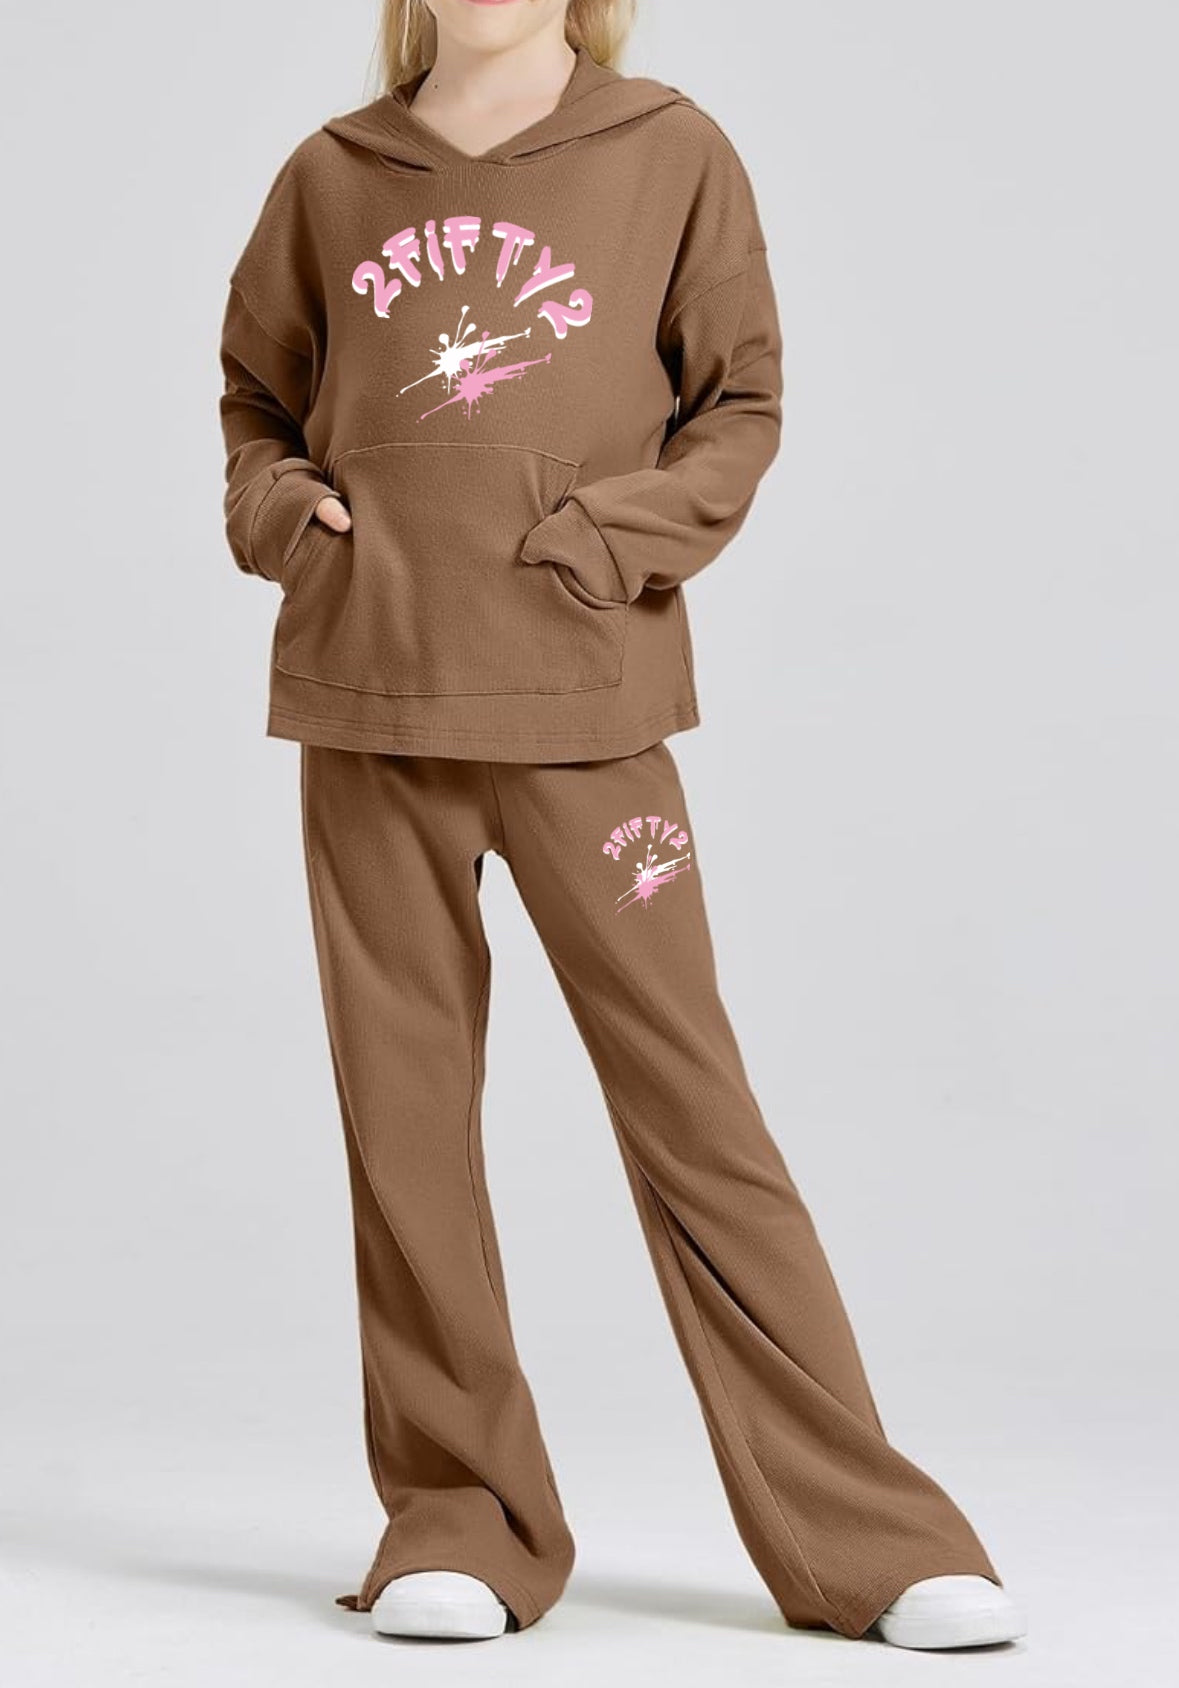 Girls flare bottoms 2 piece sweatsuit by 2fifty2